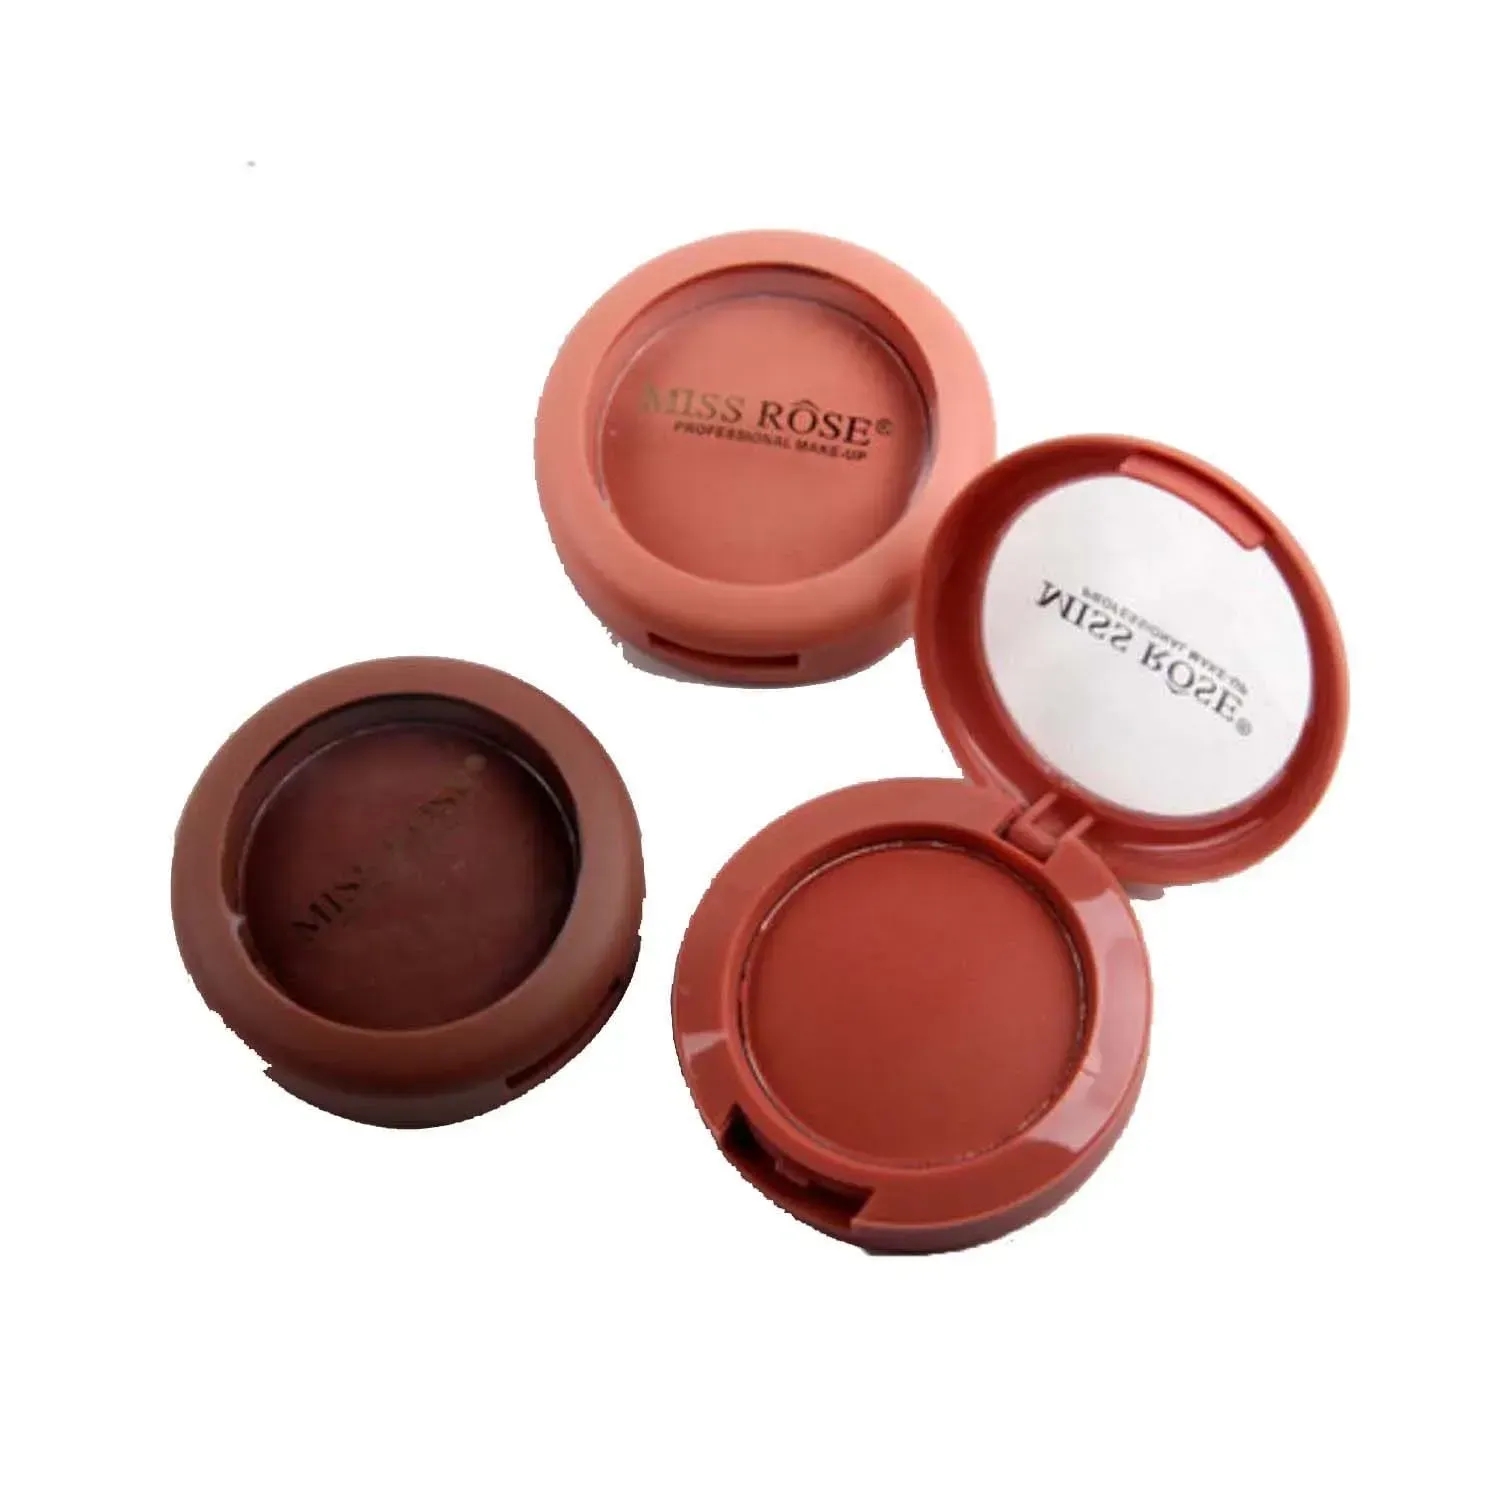 Miss Rose | Miss Rose Professional High Pigmented Blusher - 03 Sandy Nude (20g)